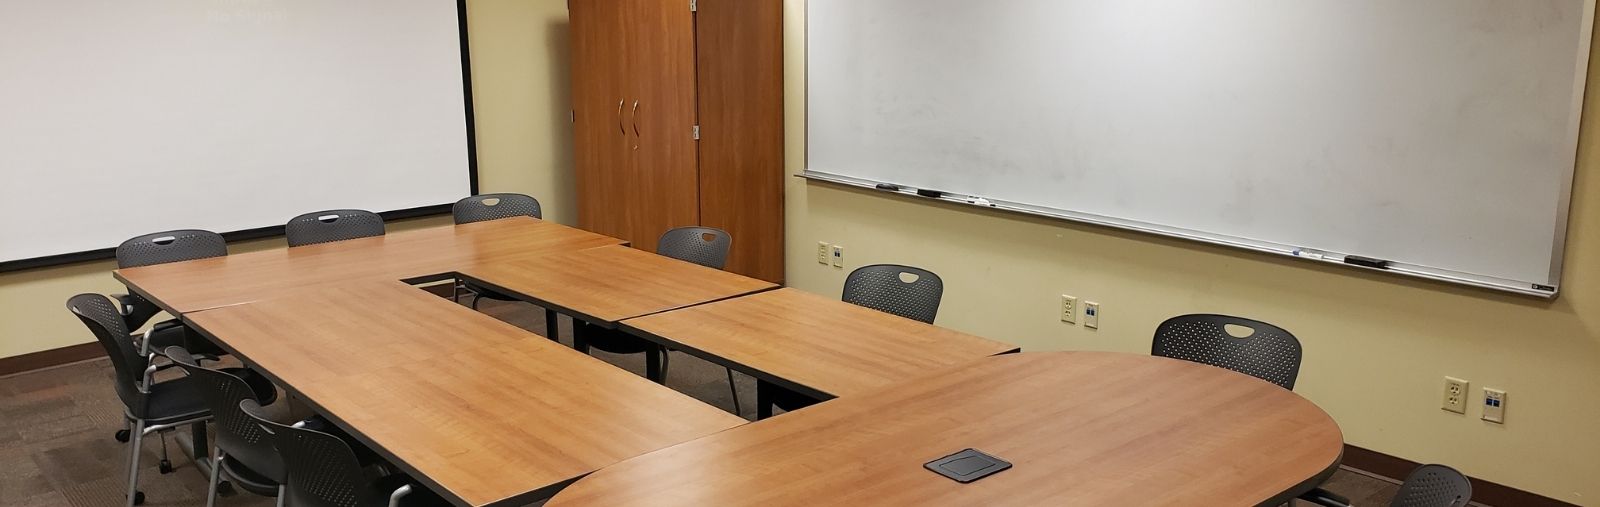 Interior of one of the library's meeting rooms